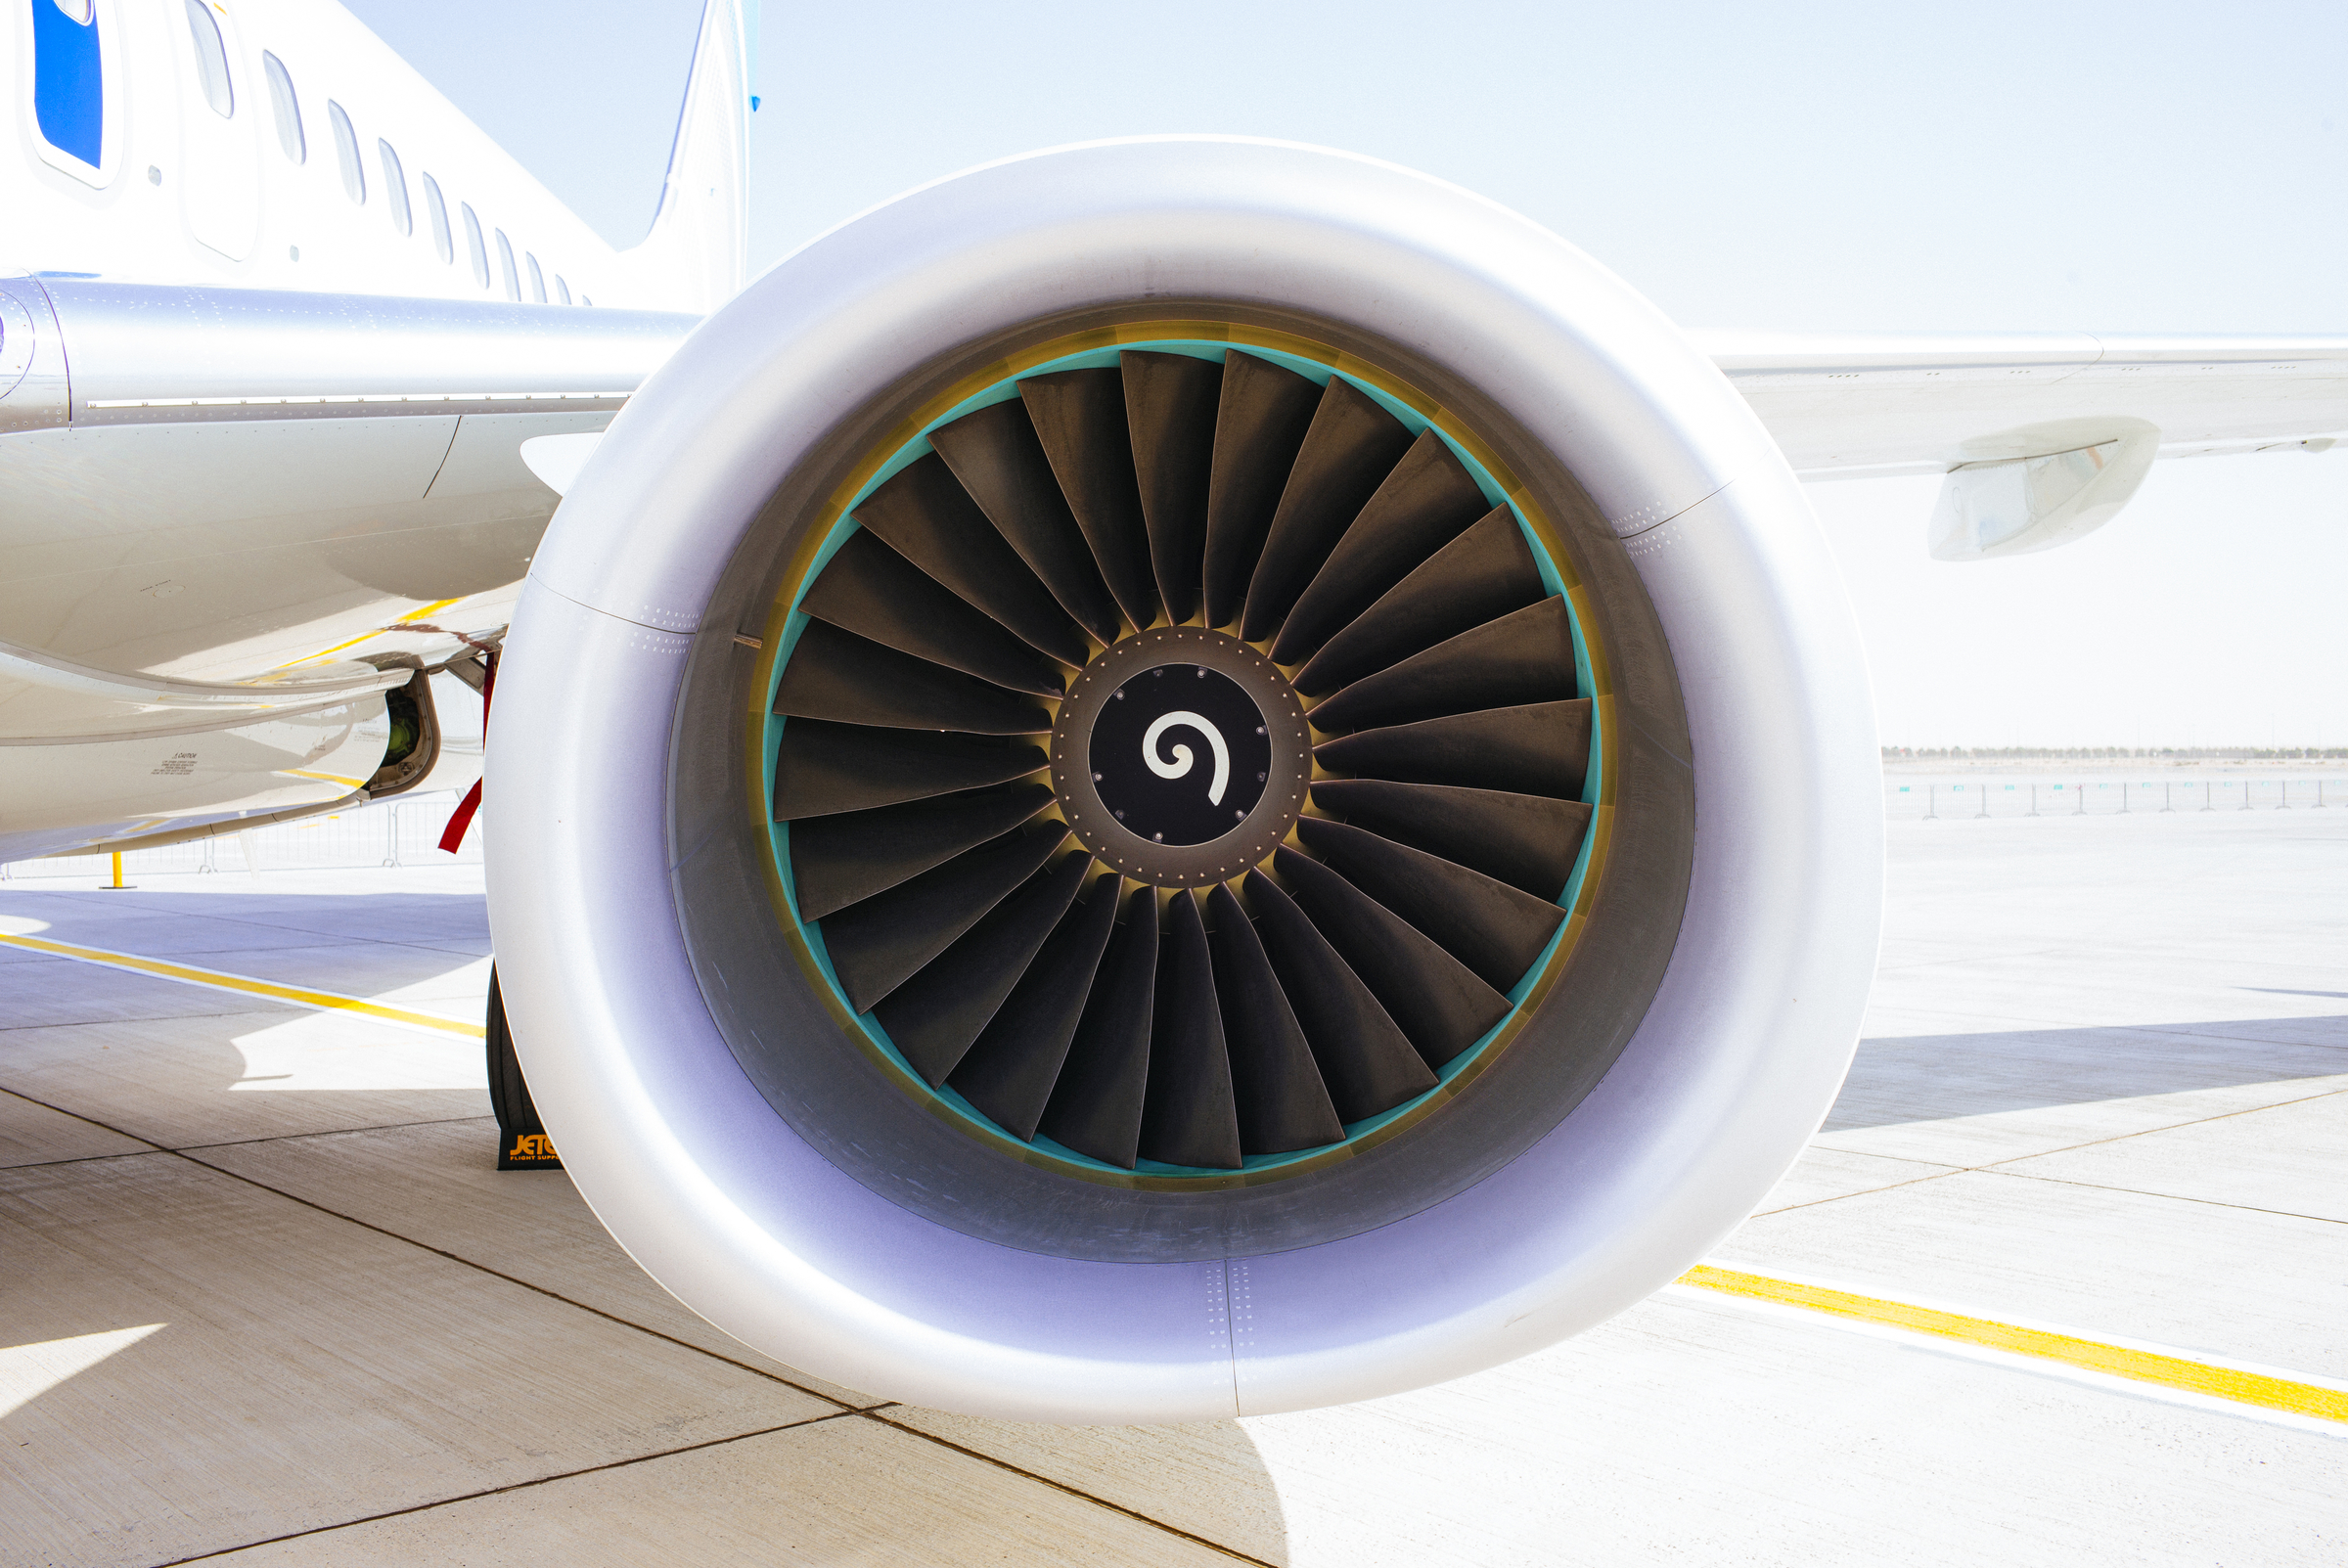 History Of The CFM56, The World's Hardest-Working Jet Engine - GE